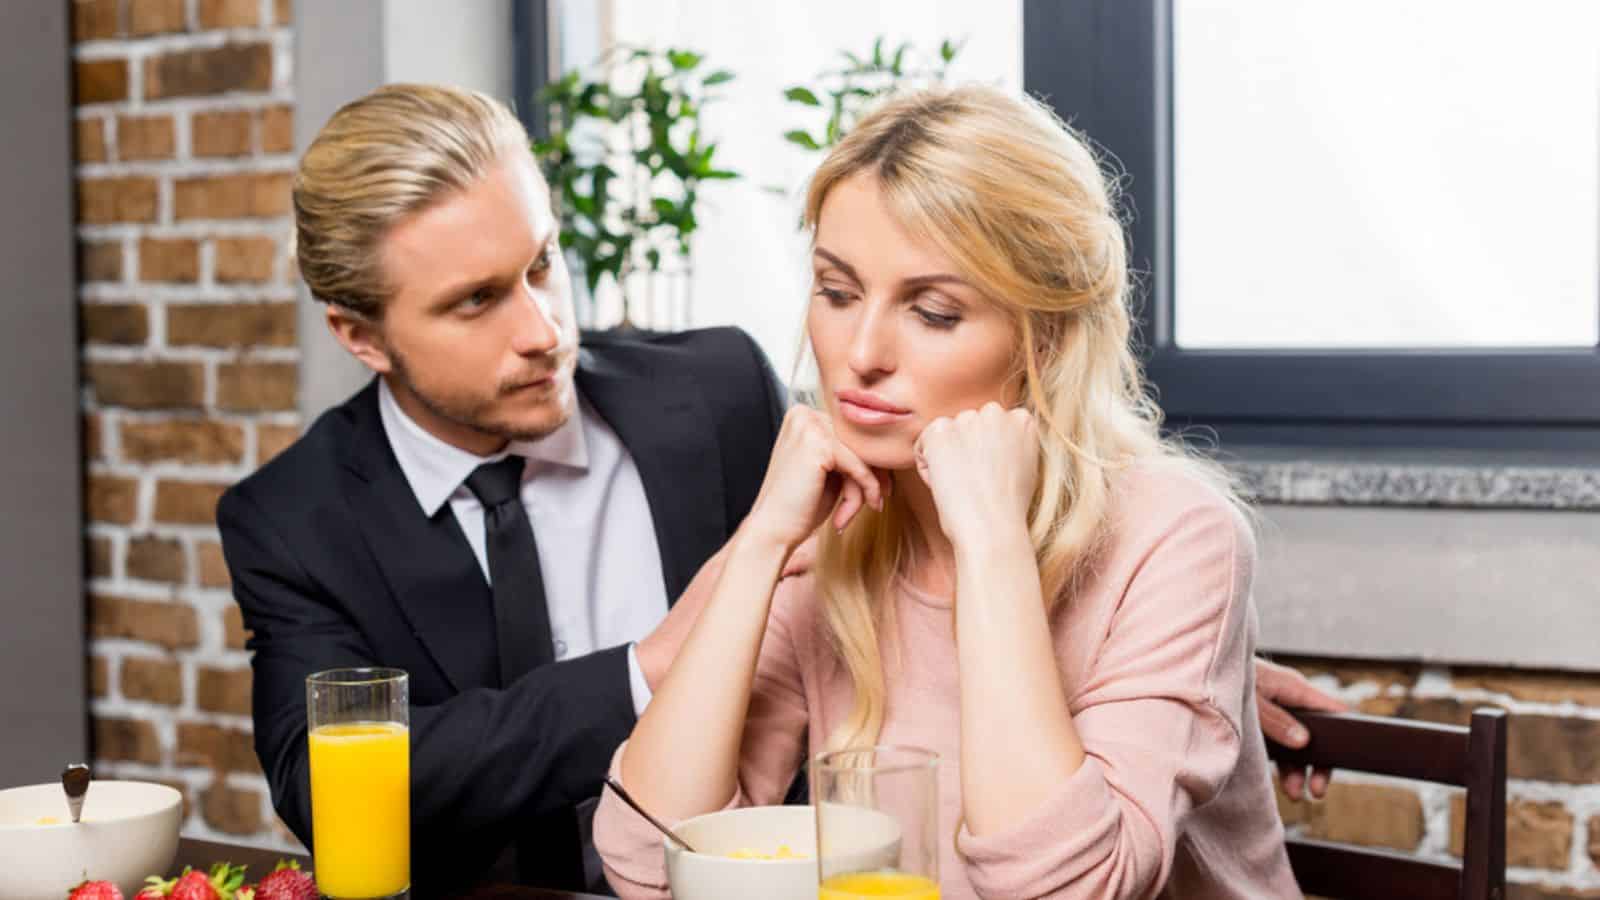 Upset woman with husband during breakfast